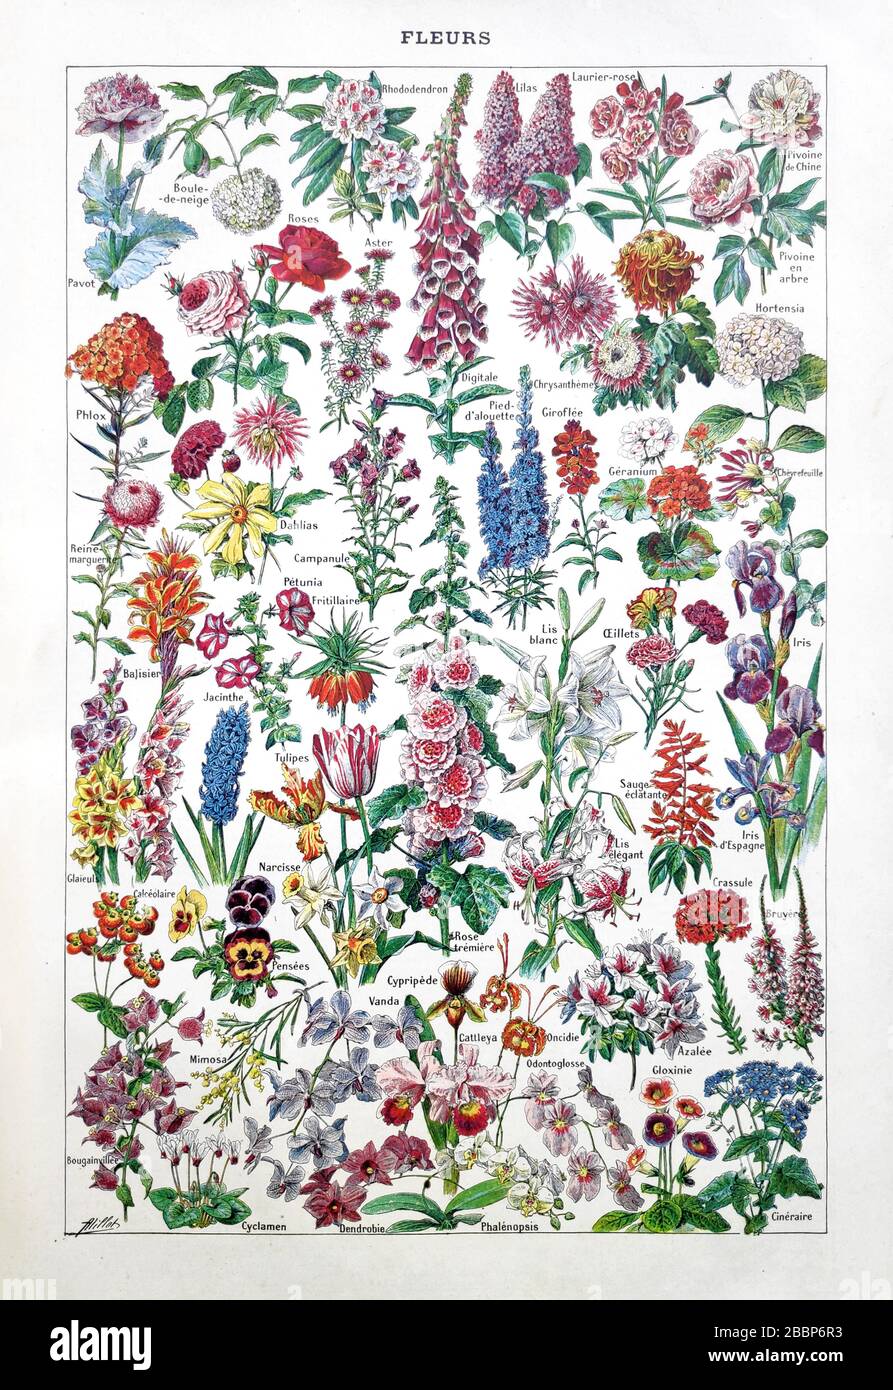 Old illustration about flowers by Adolphe Philippe Millot printed in the late 19th century. Stock Photo